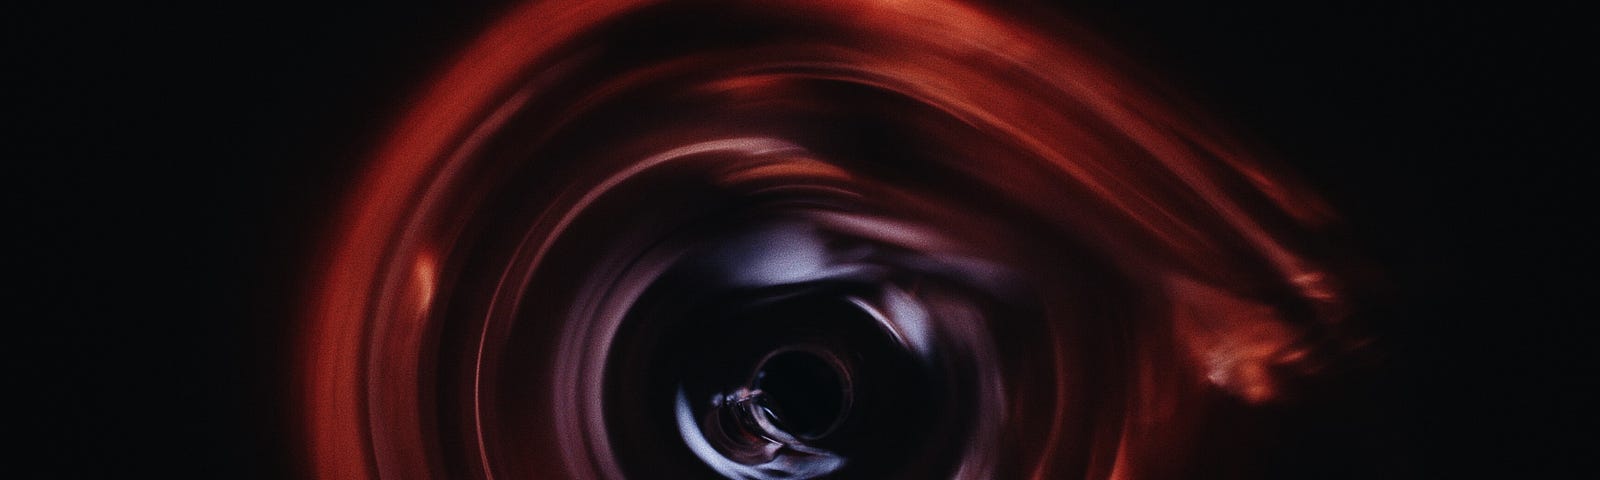 A red circle or spiral on a black background. Depicts a black hole.